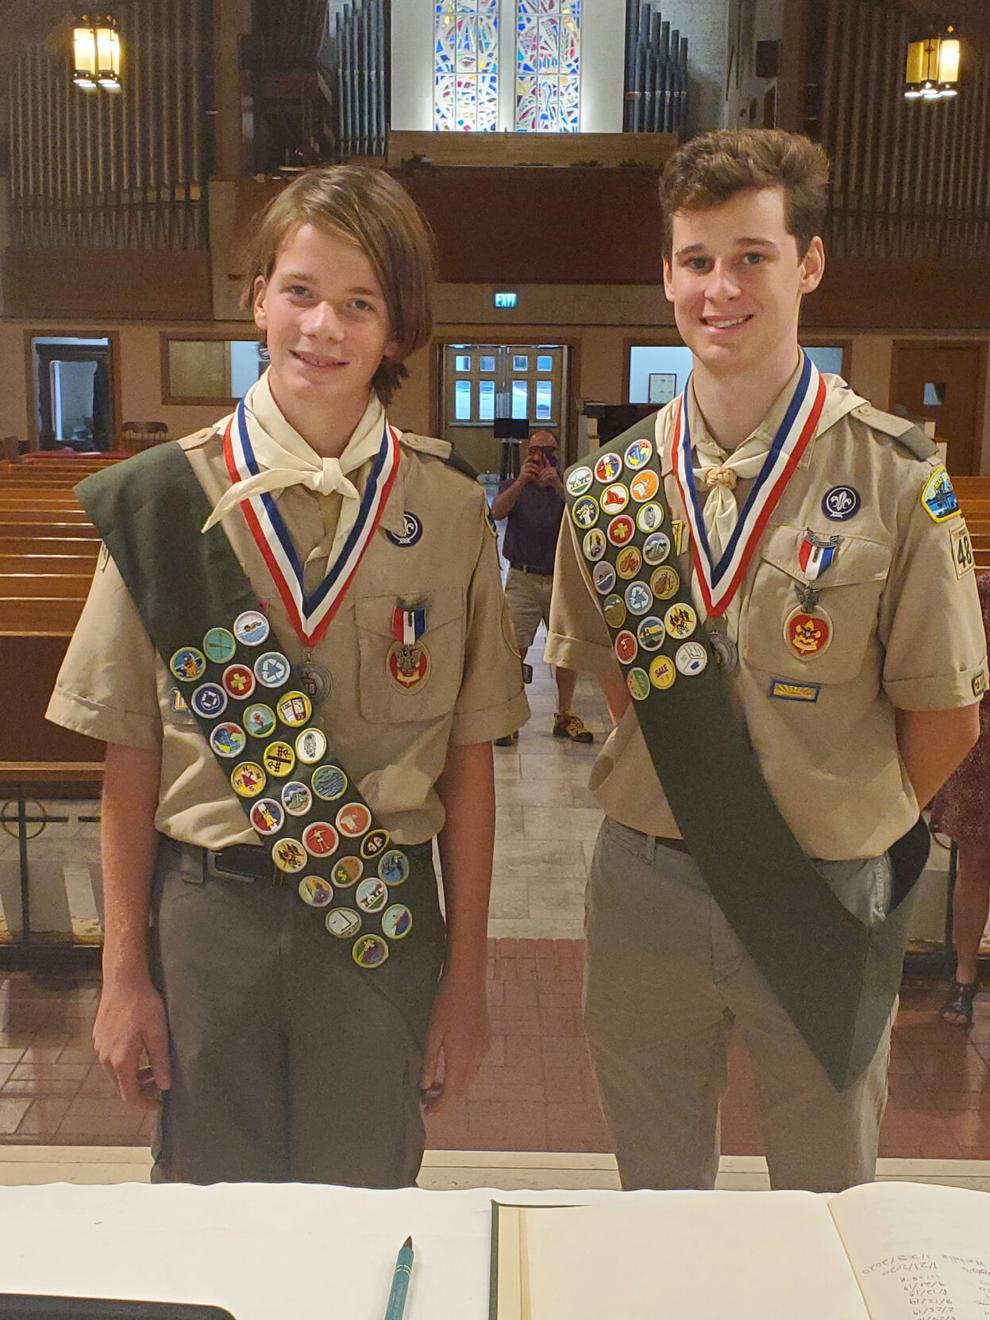 Uptown New Orleans Boy Scouts earn Eagle rank | Crescent City community ...